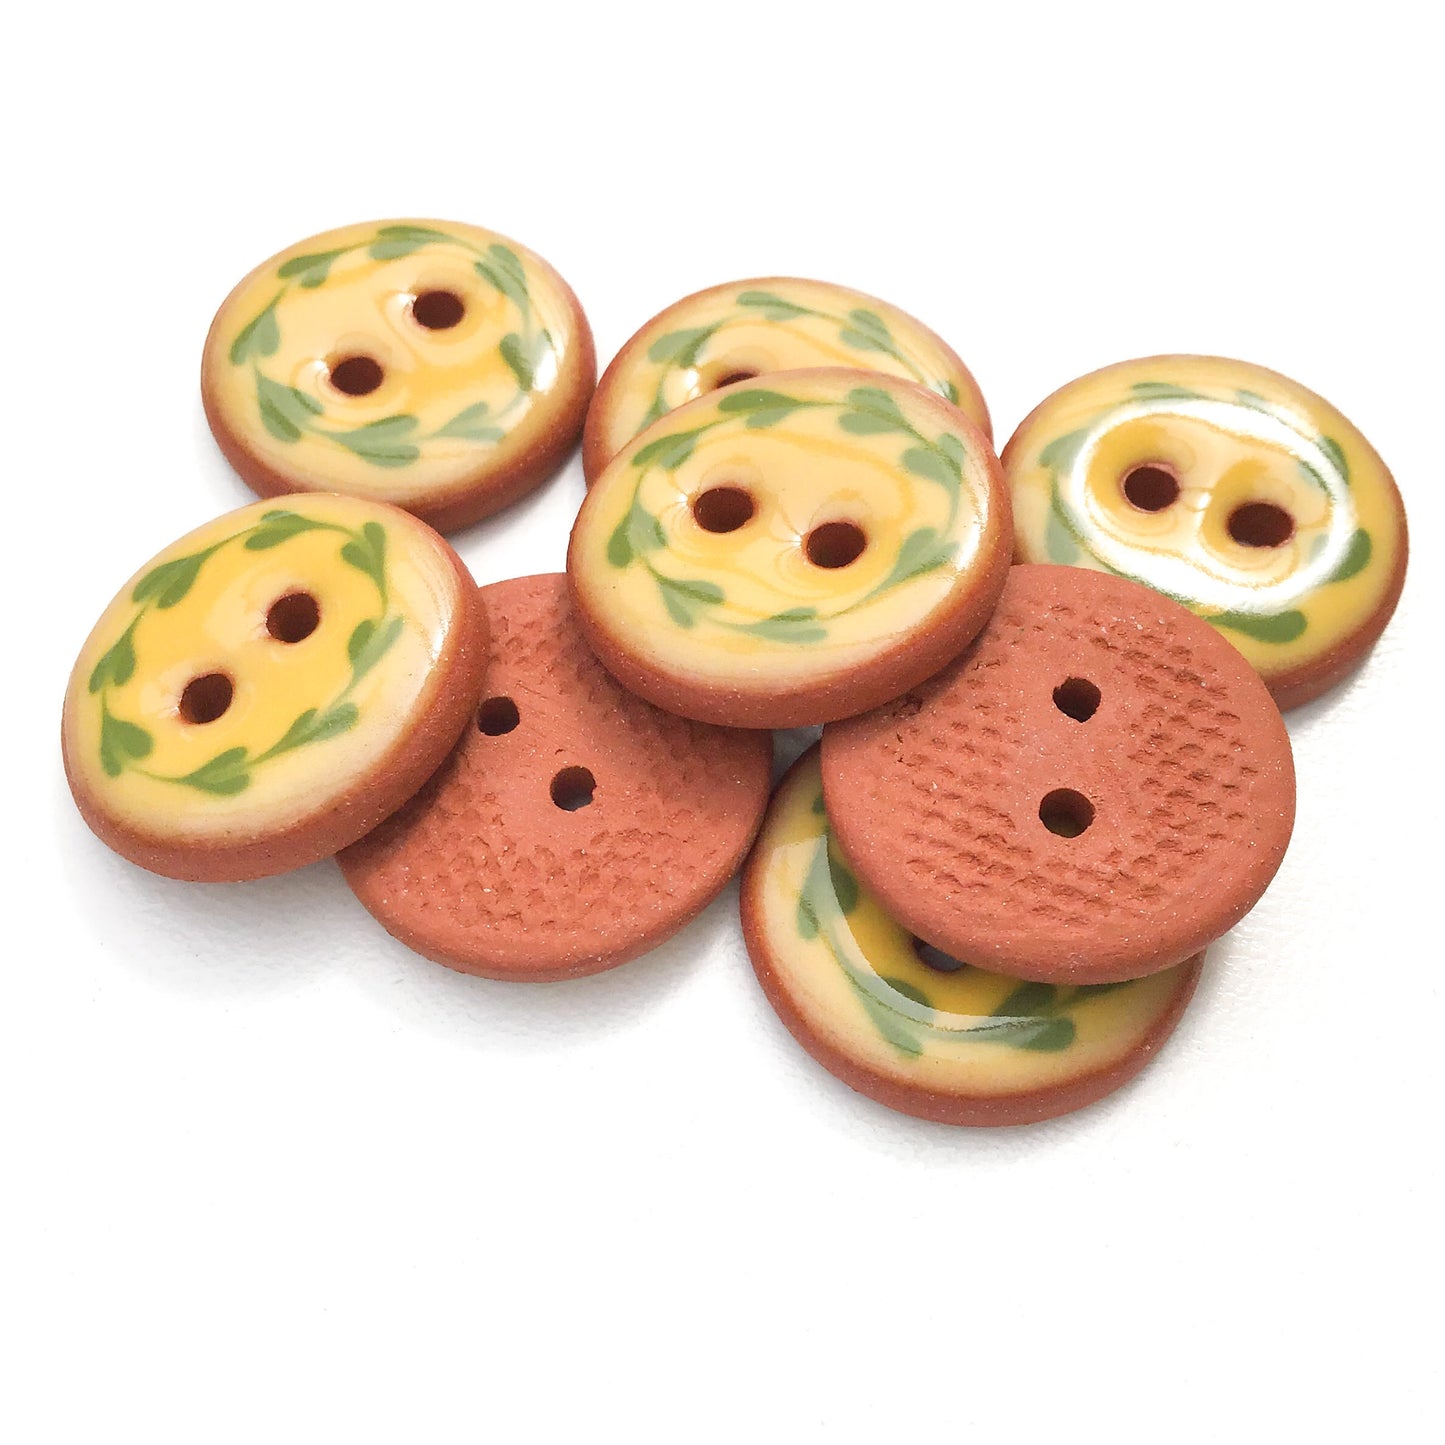 Yellow & Green Floral Wreath Ceramic Buttons - Round Ceramic Buttons - 3/4" - 8 Pack